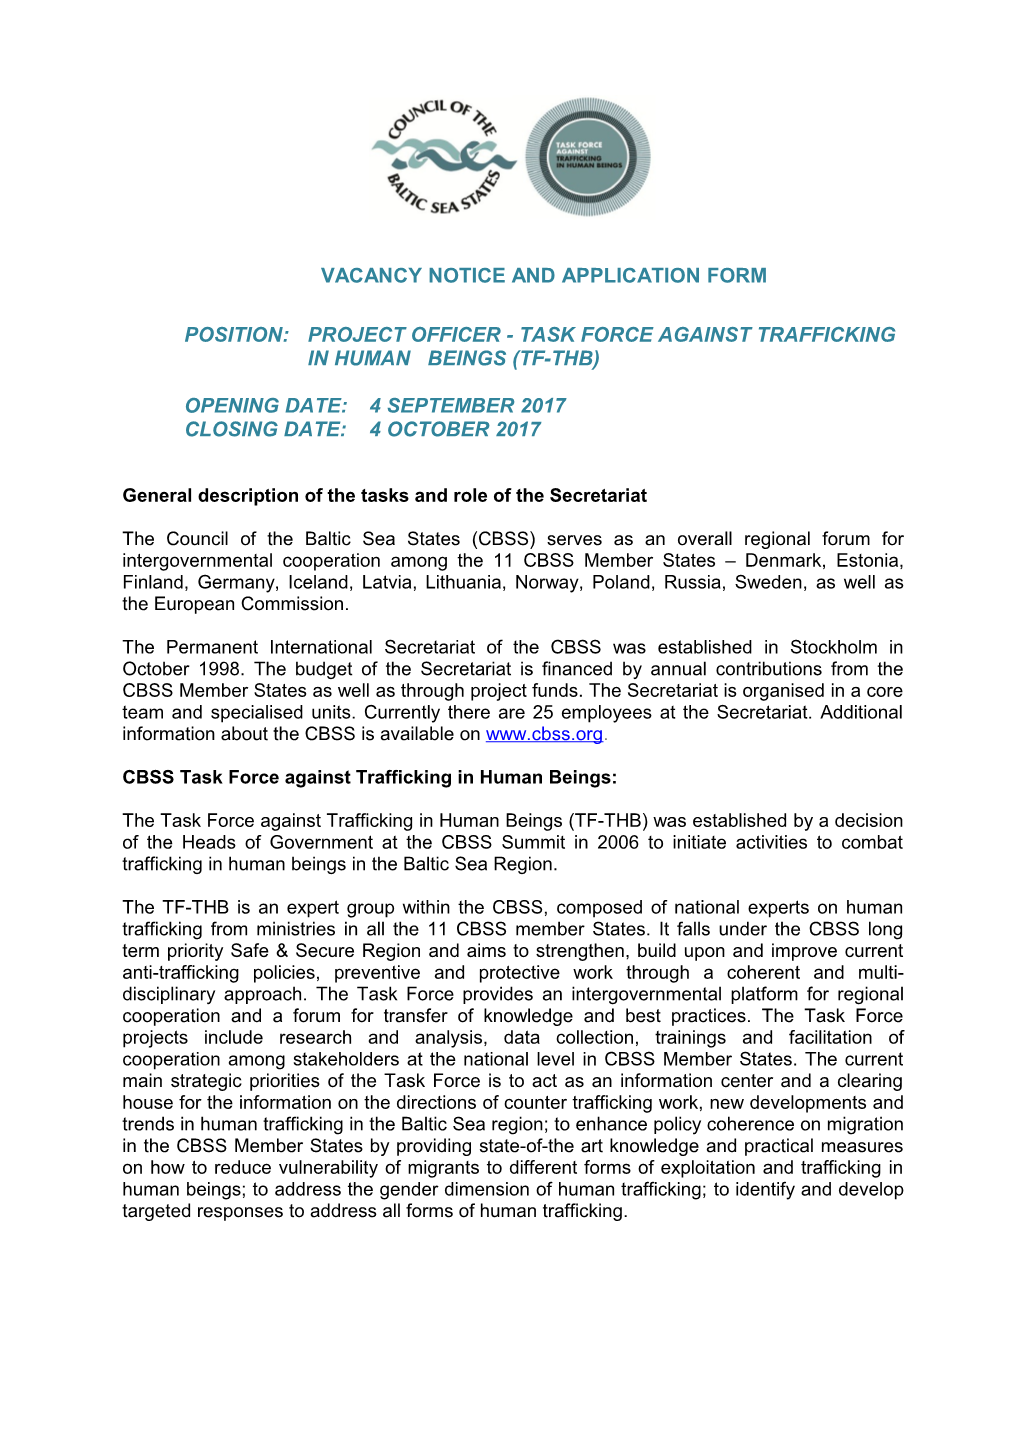 Vacancy Notice and Application Form